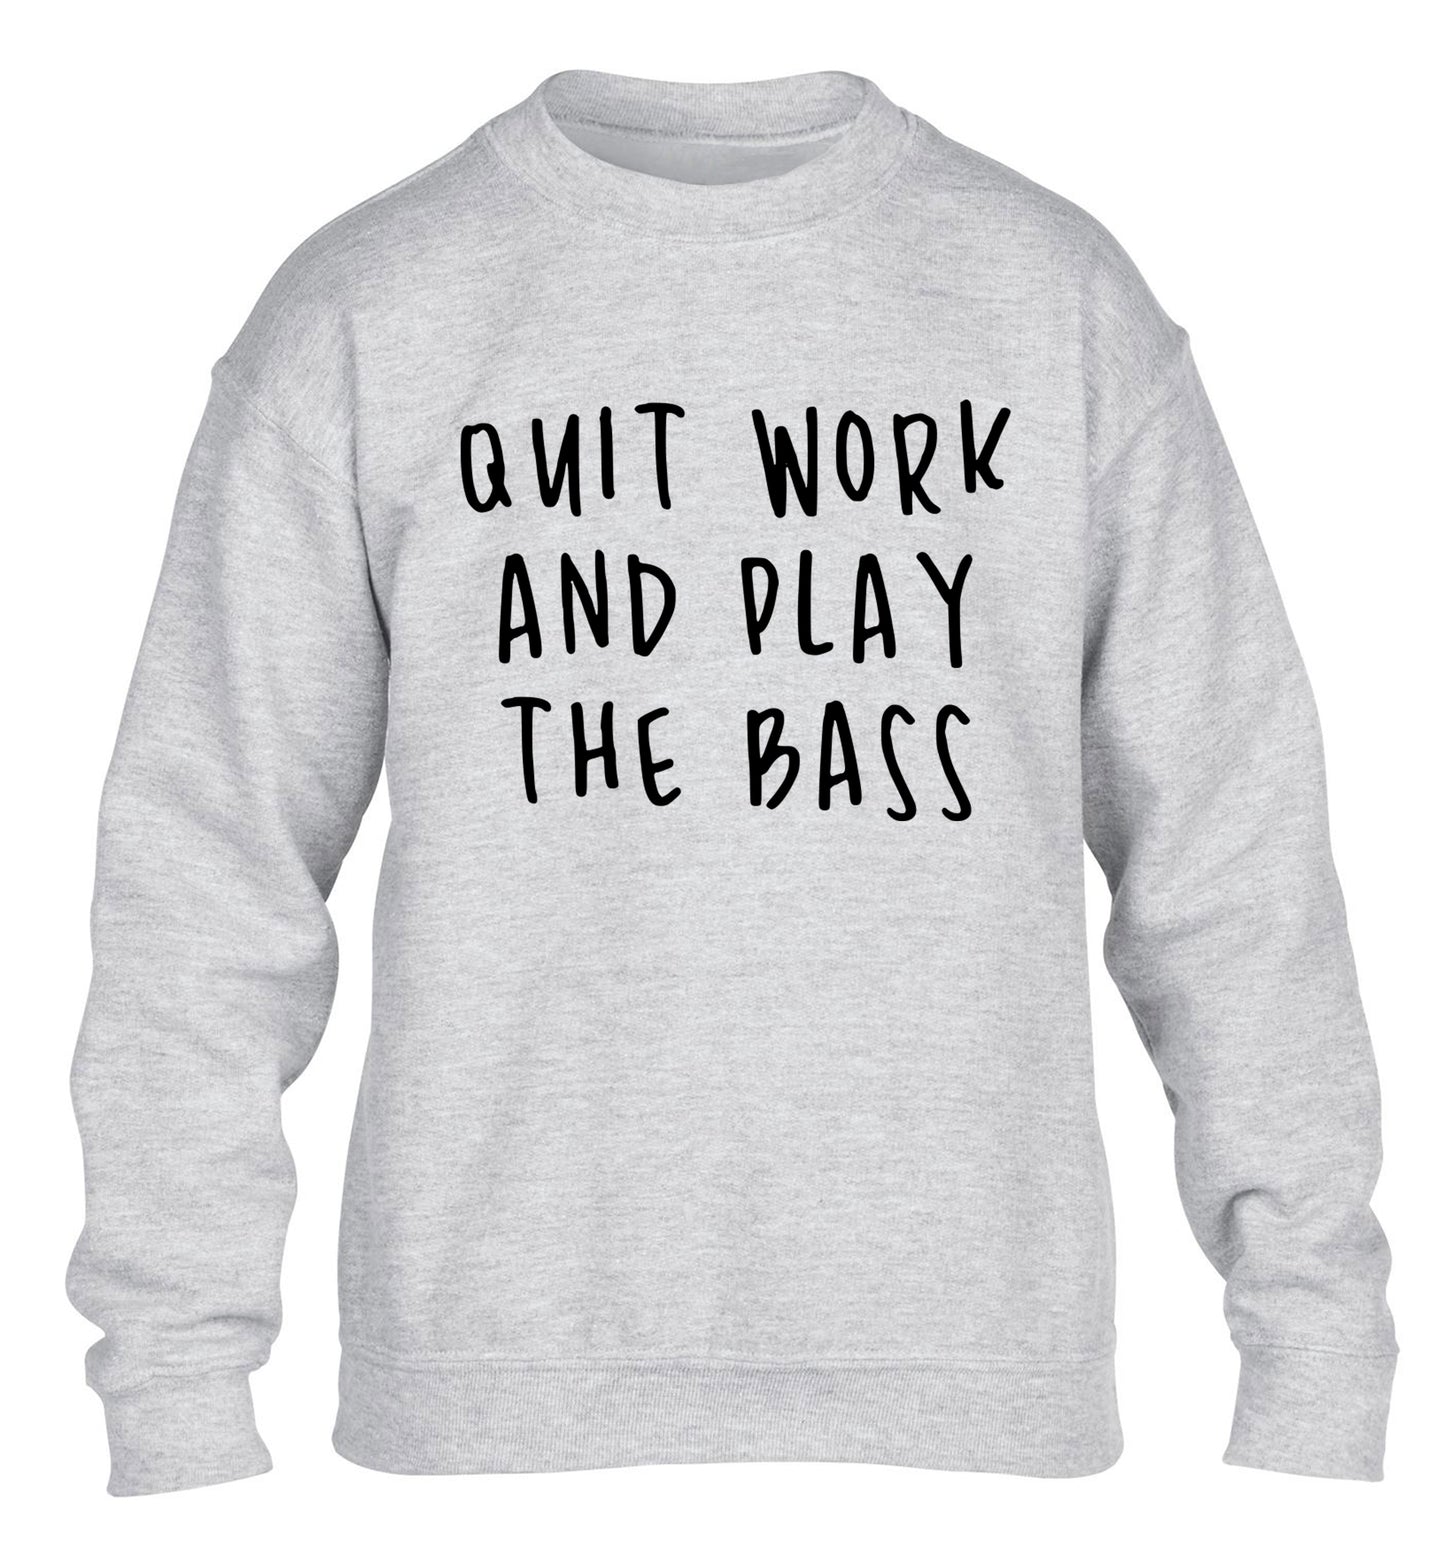 Quit work and play the bass children's grey sweater 12-14 Years